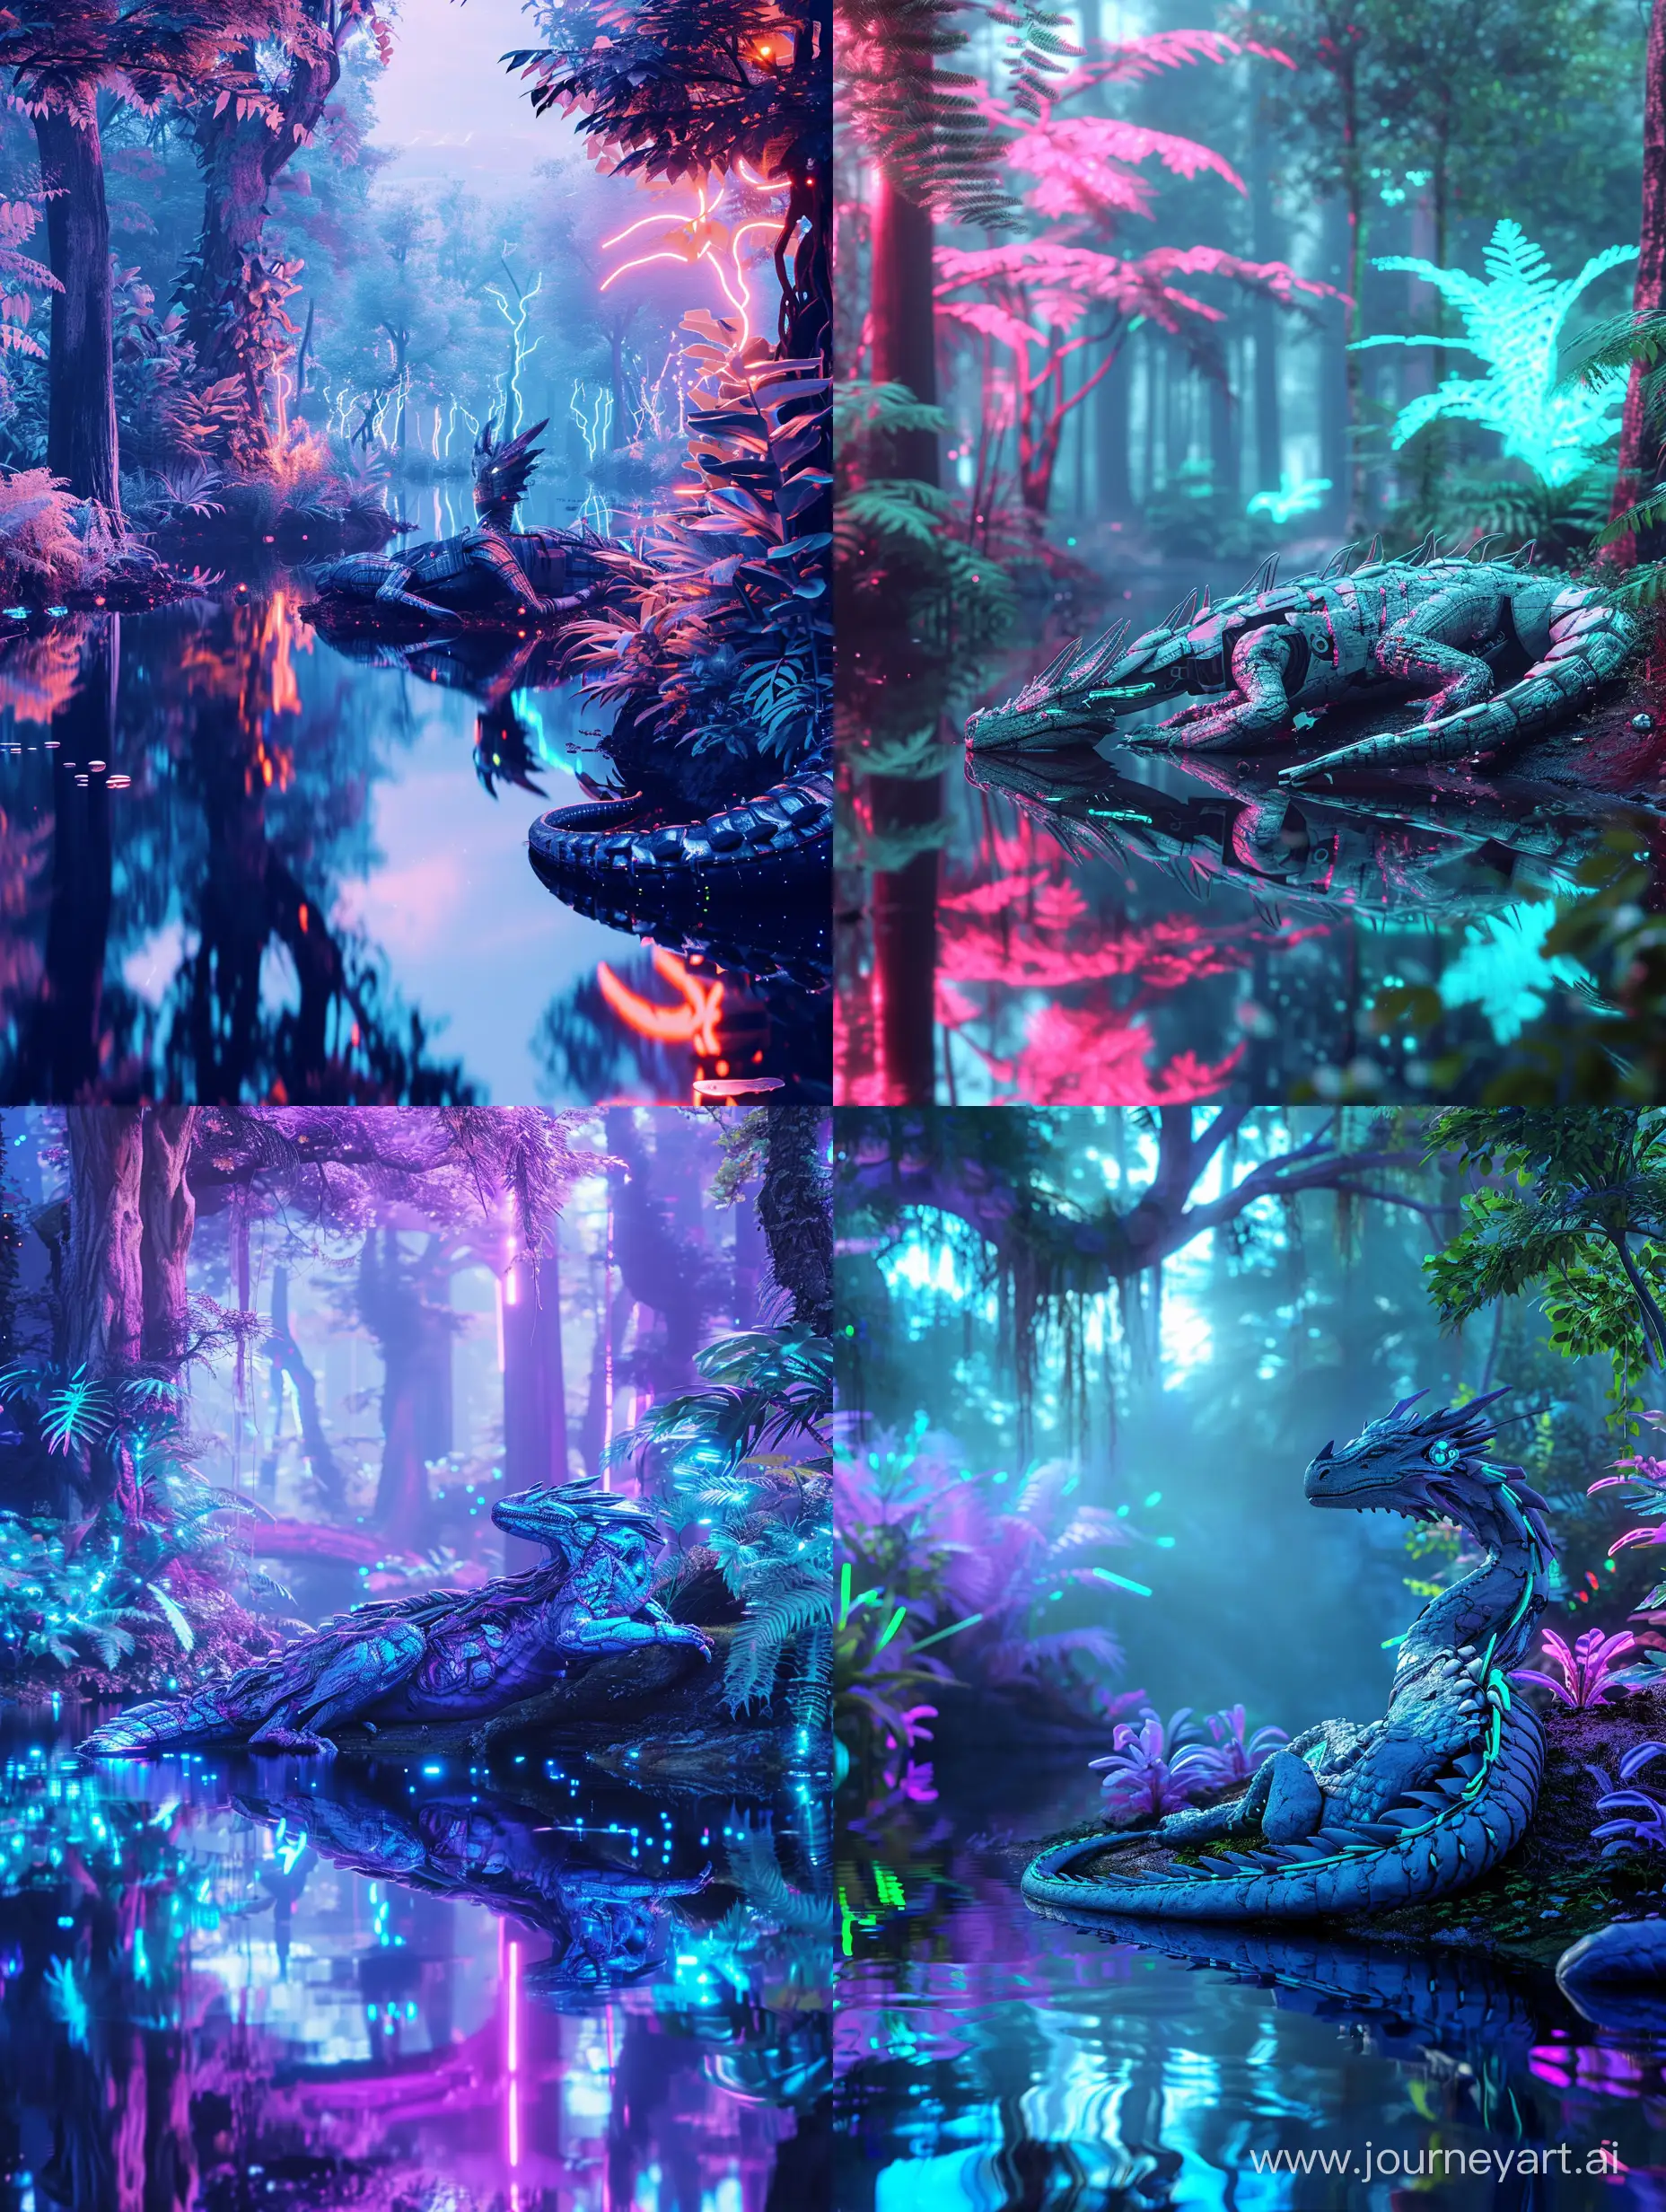 Tranquil-Cyborg-Dragon-Resting-by-Neon-Lake-in-Surreal-Forest